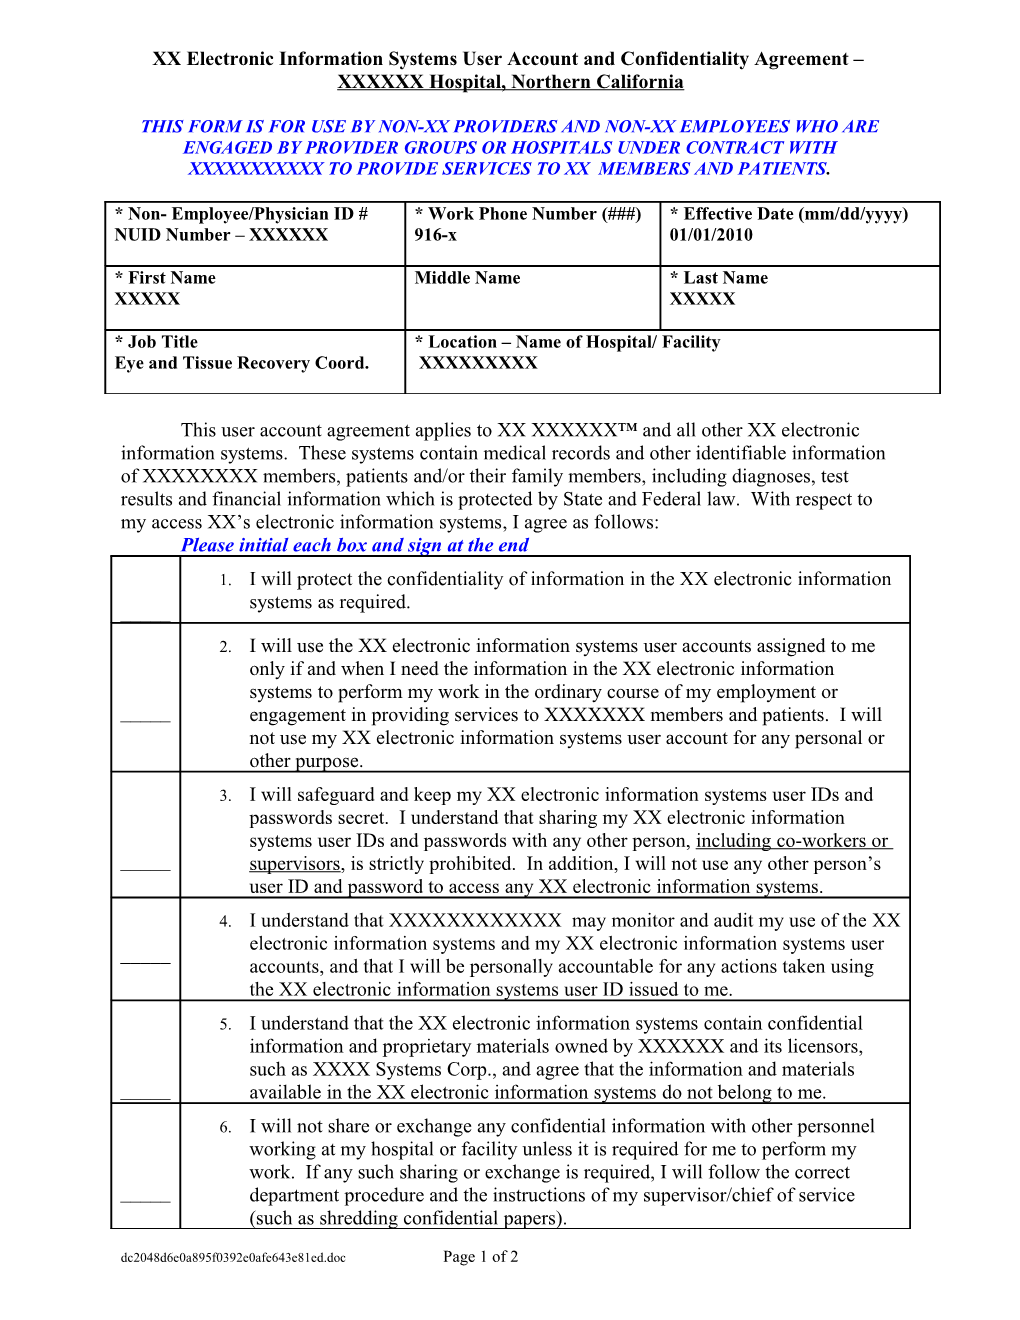 Confidentiality Agreement - Sample 1